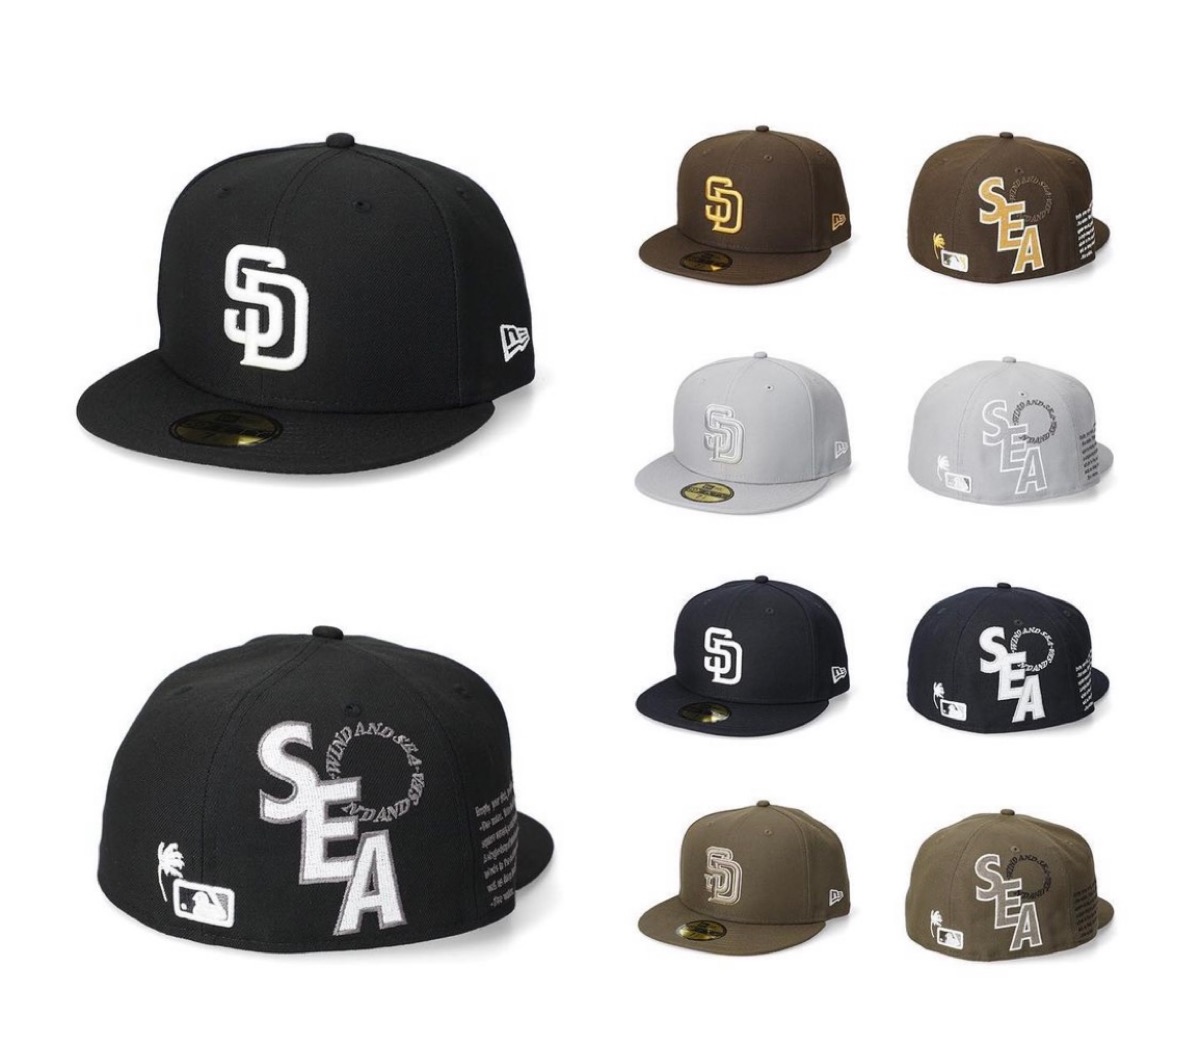 NEW ERA® × San Diego Padres × WIND AND SEA コラボアイテムが国内1月15日より発売 | UP TO DATE